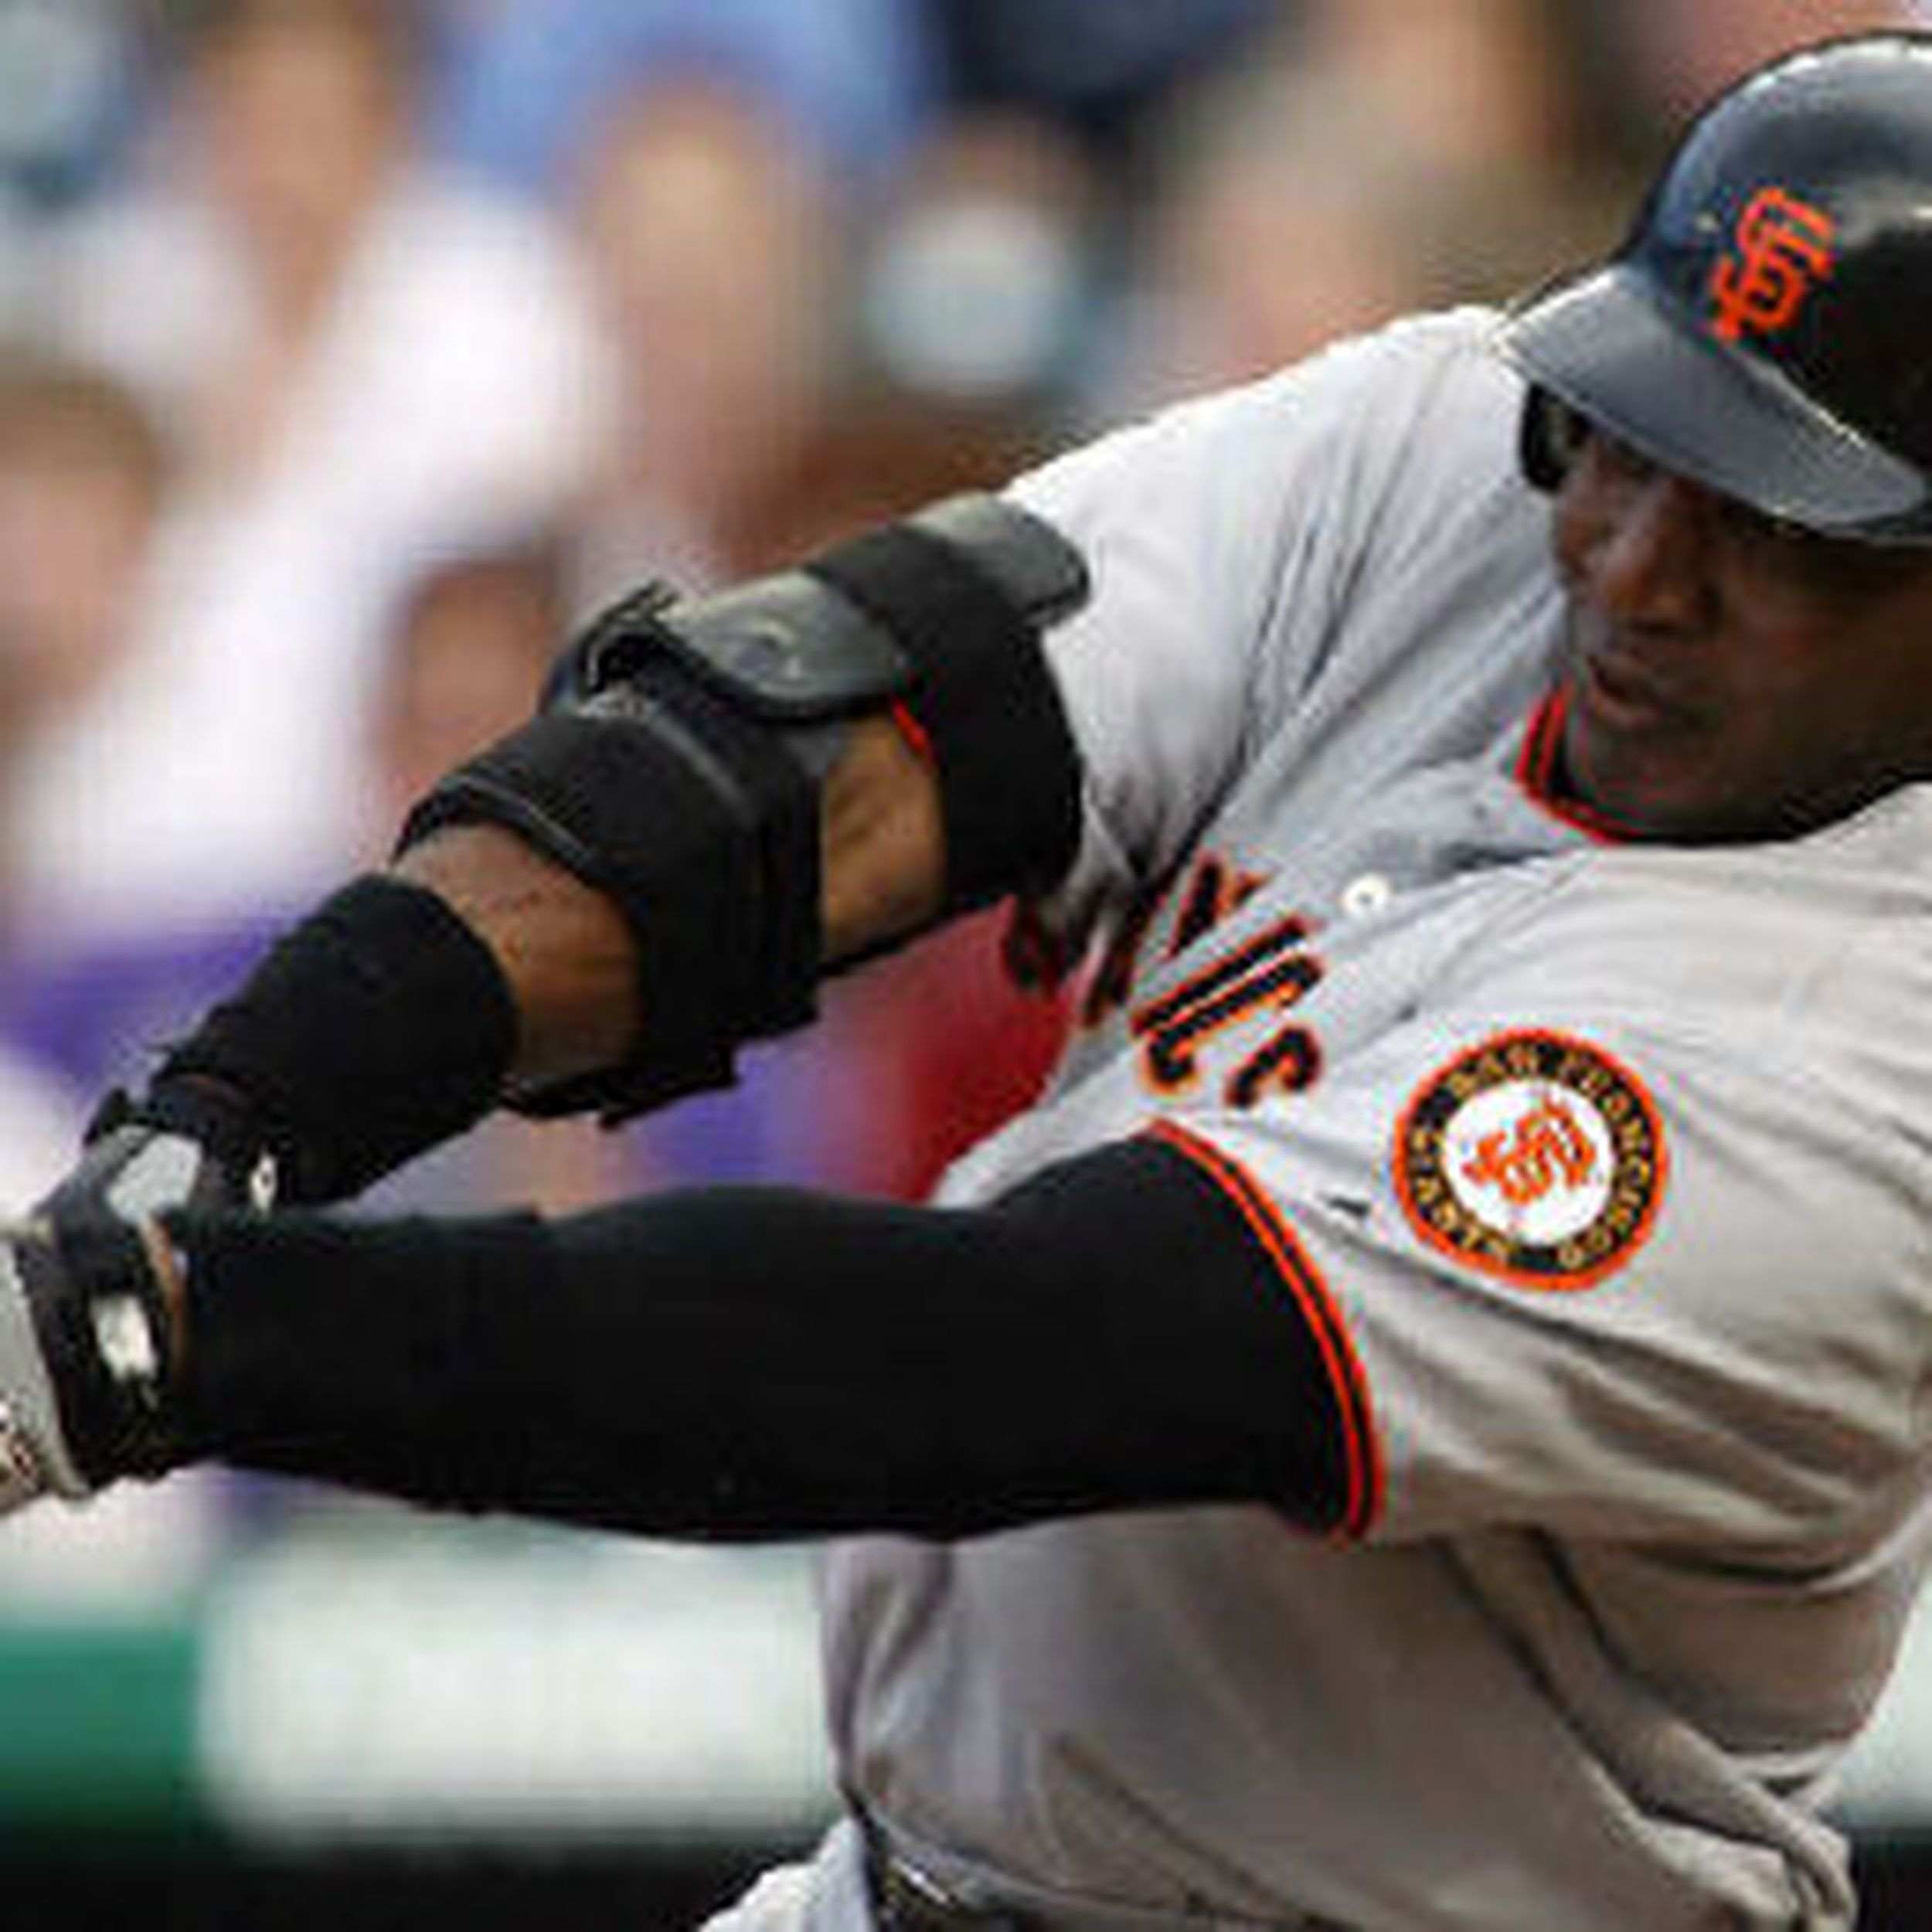 Rockies killer Barry Bonds reminisces on hitting homers against Colorado